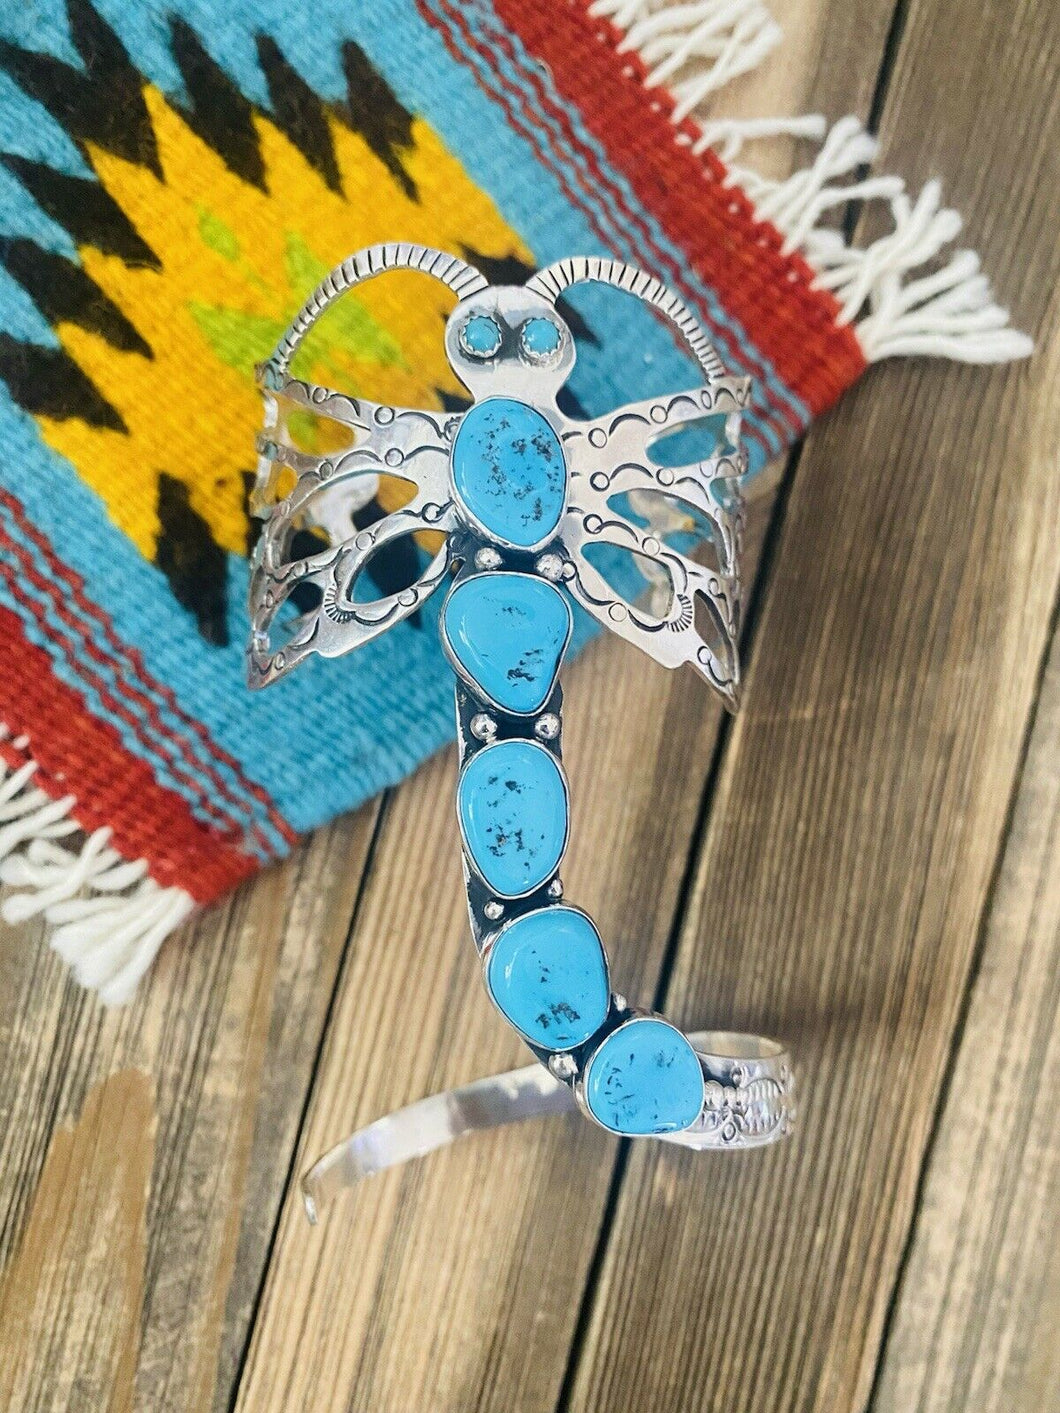 Navajo Sterling Silver & Kingman Turquoise Dragonfly Cuff By Russell Sam